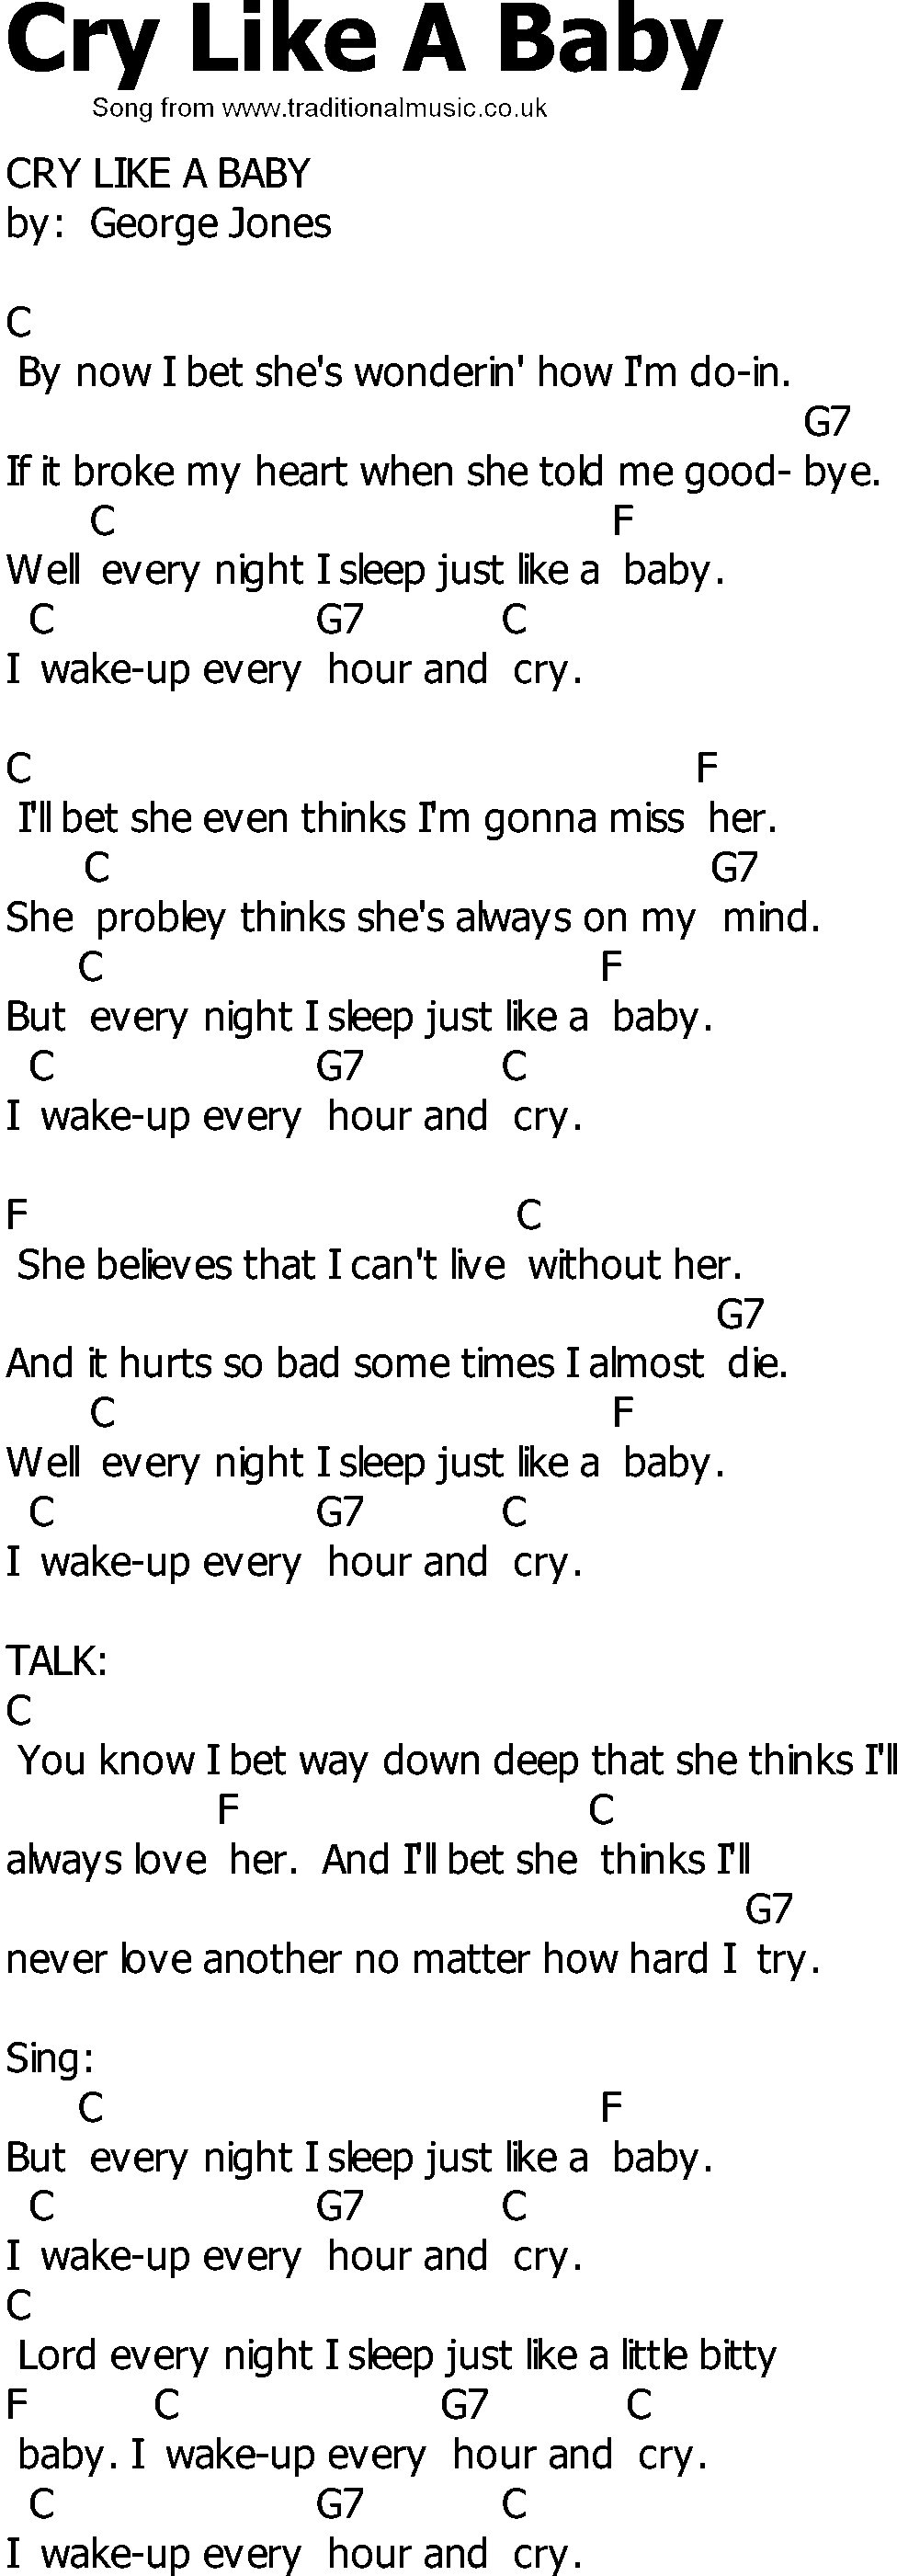 Old Country song lyrics with chords - Cry Like A Baby